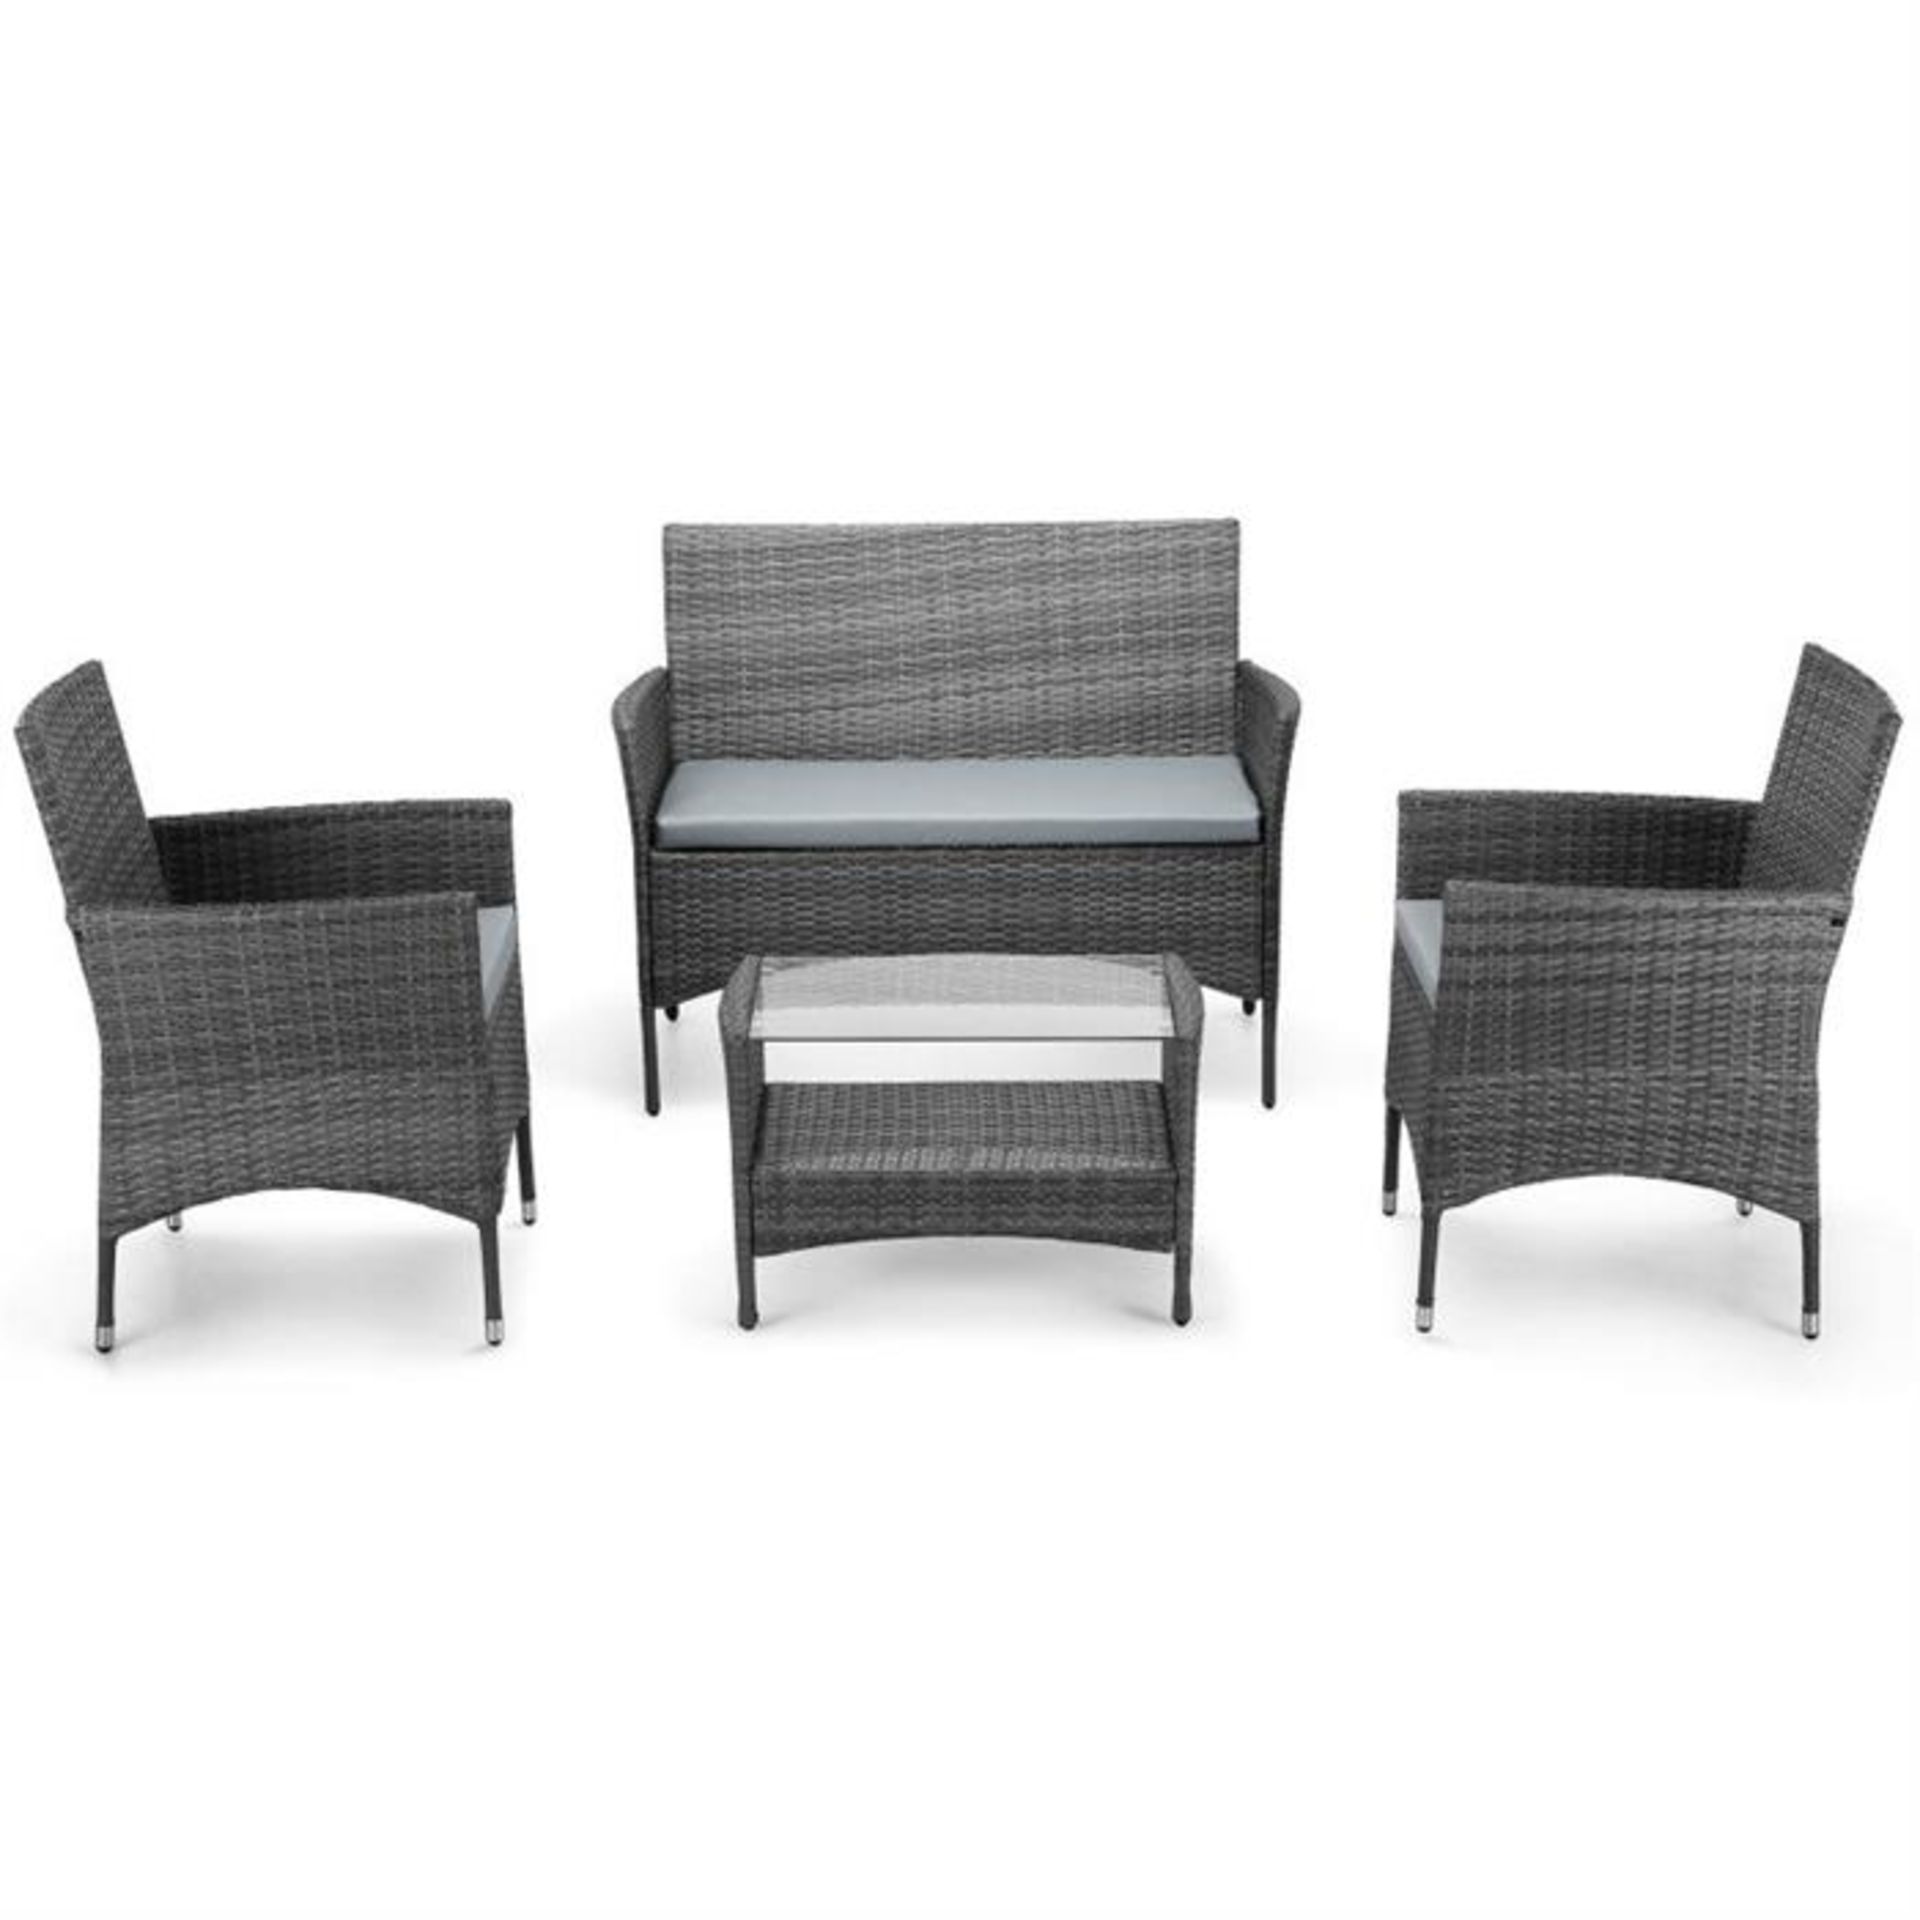 4 Piece Grey rattan sofa set, boxed and unchecked, please note by clicking to bid you agree that